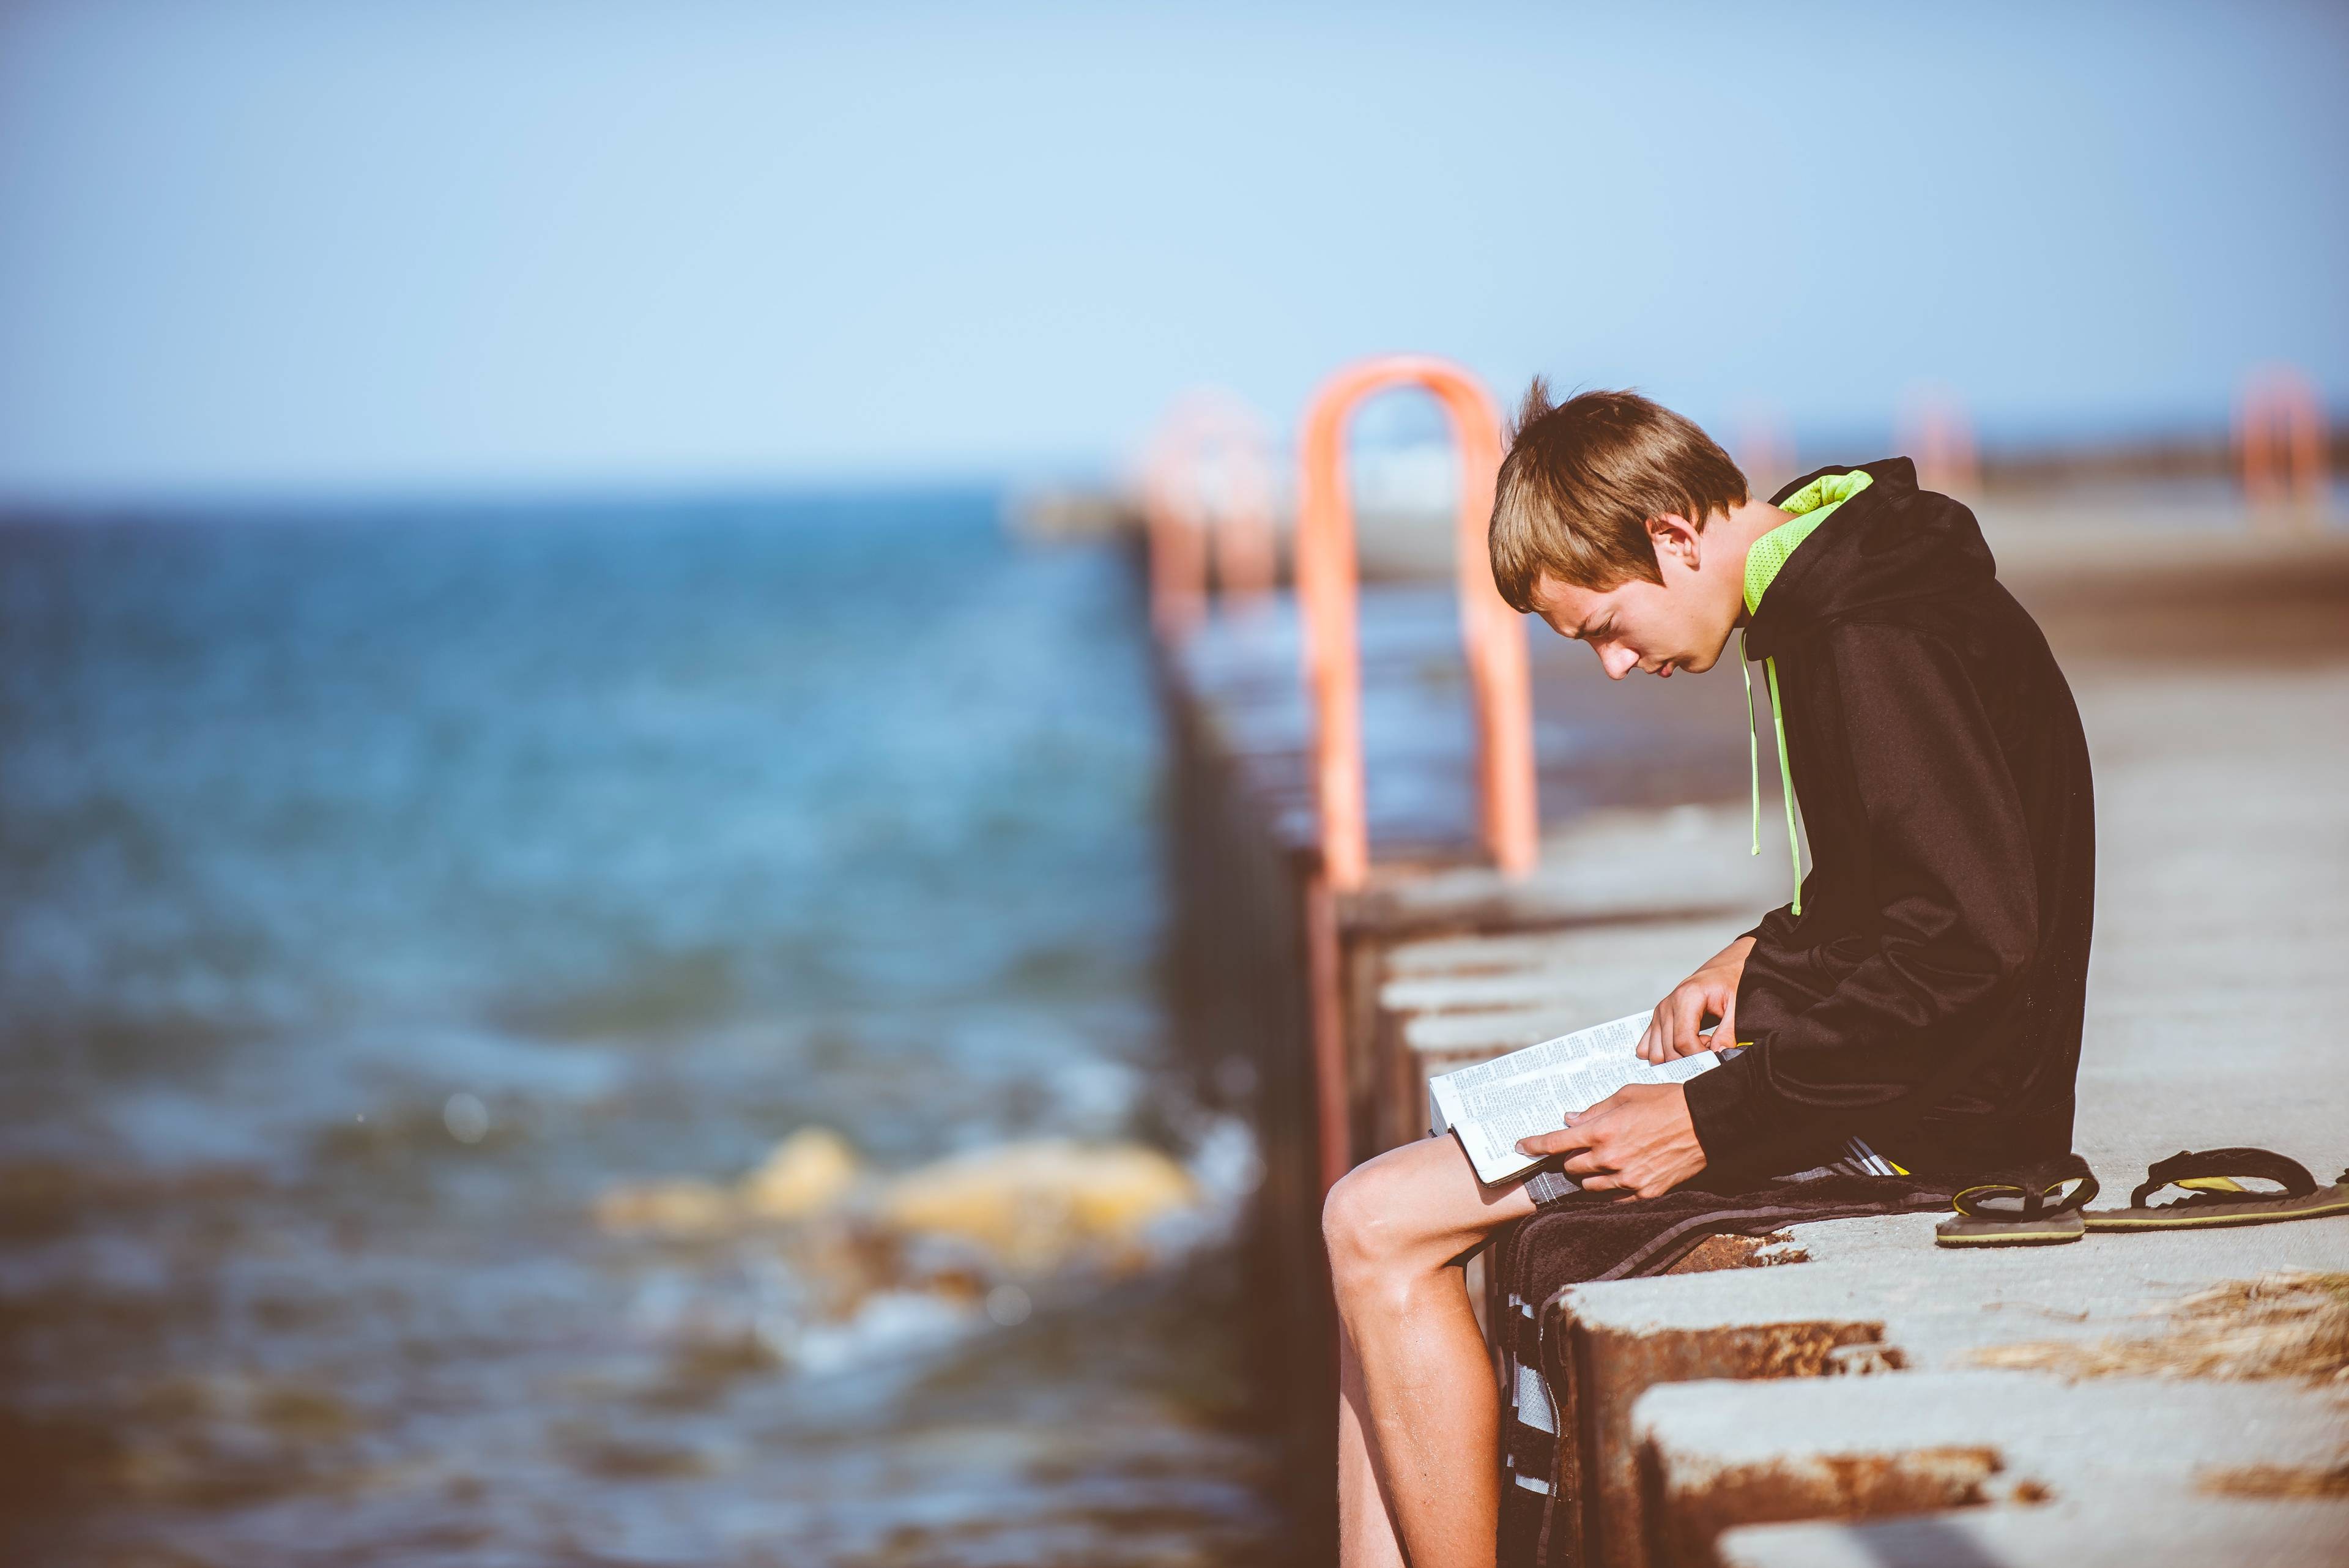 man writing on a notepad, sitting on dock